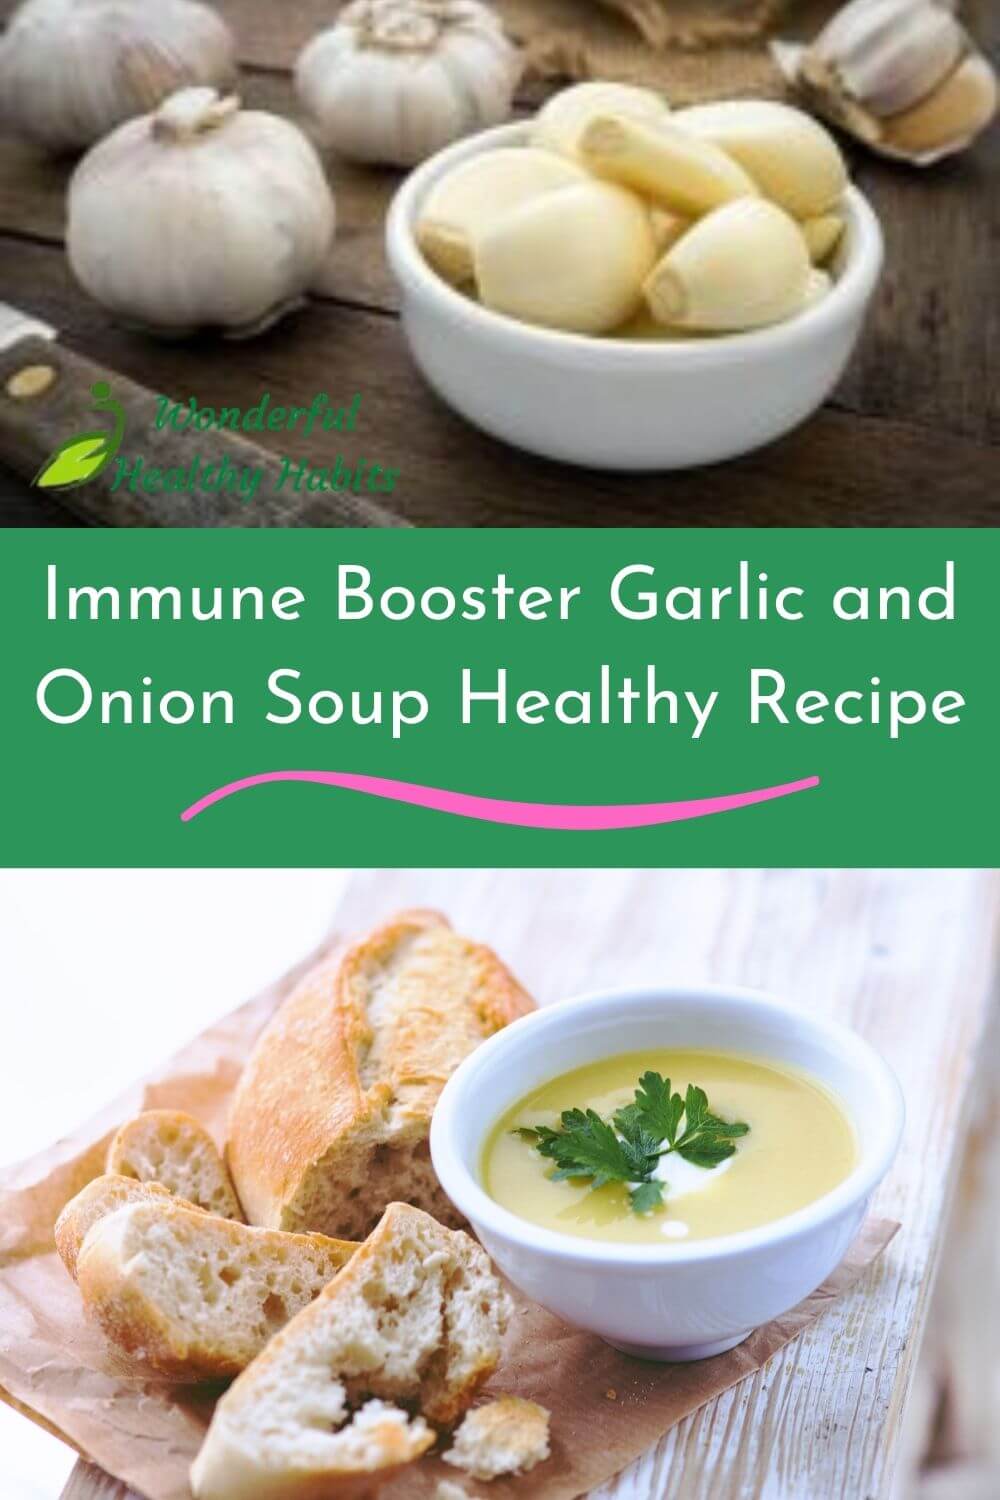 Immune Booster Garlic and Onion Soup Healthy Recipe